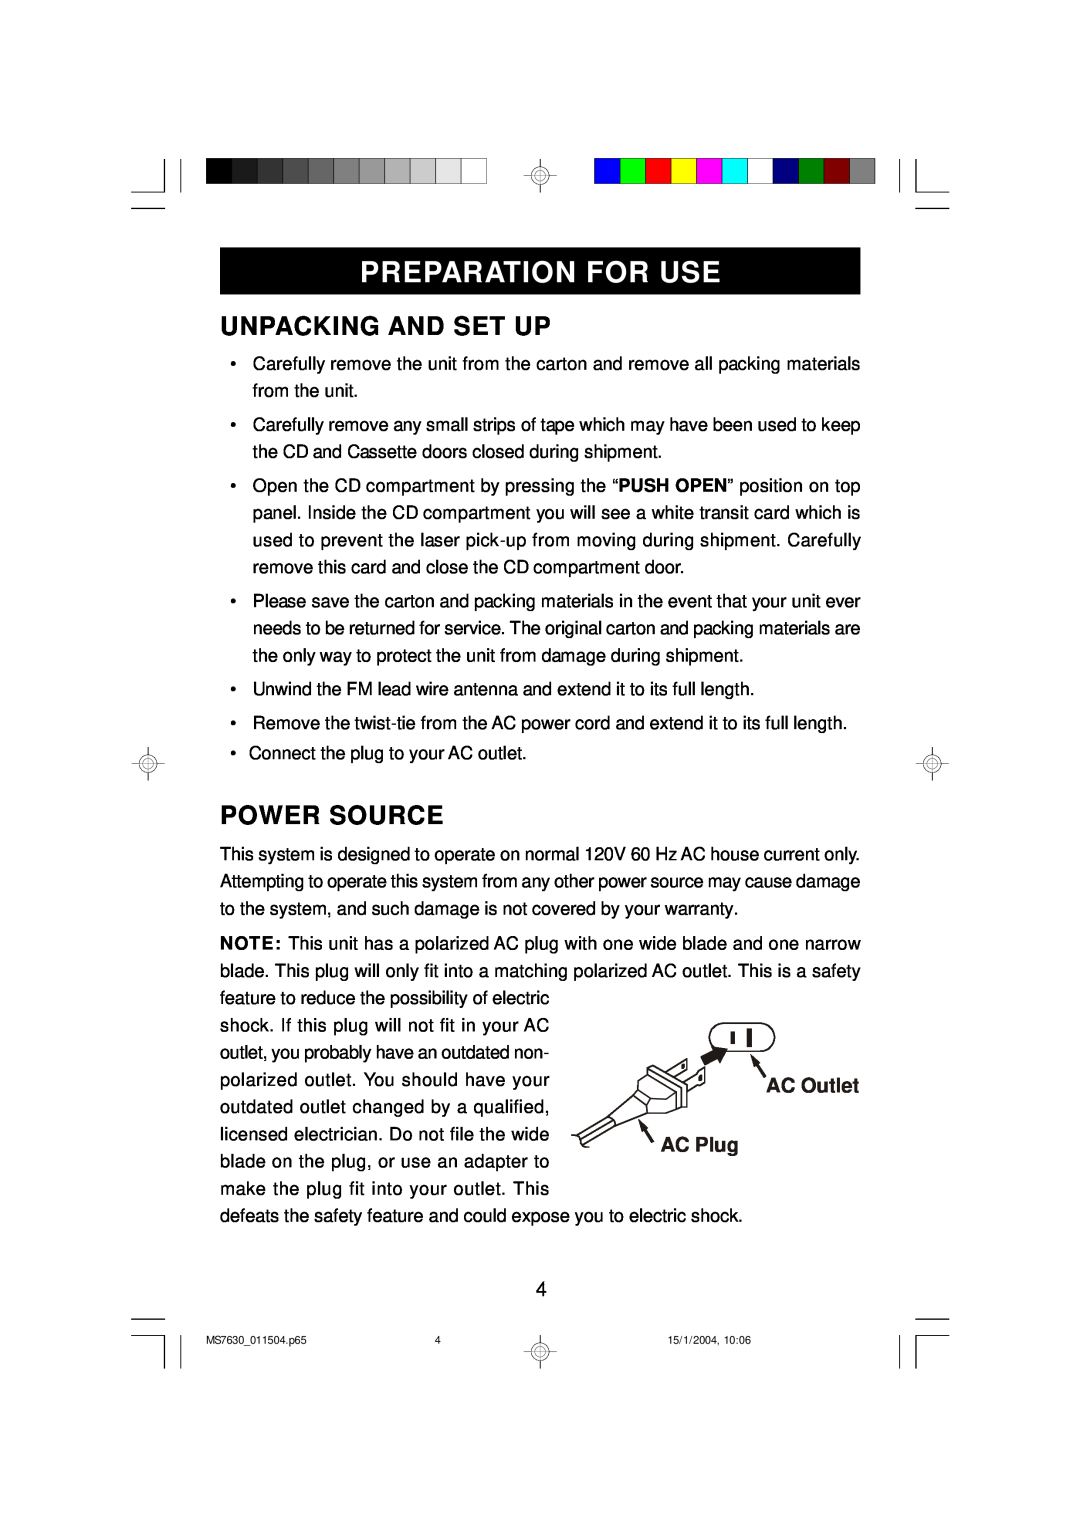 Emerson MS7630 owner manual Preparation For Use, Unpacking And Set Up, Power Source 